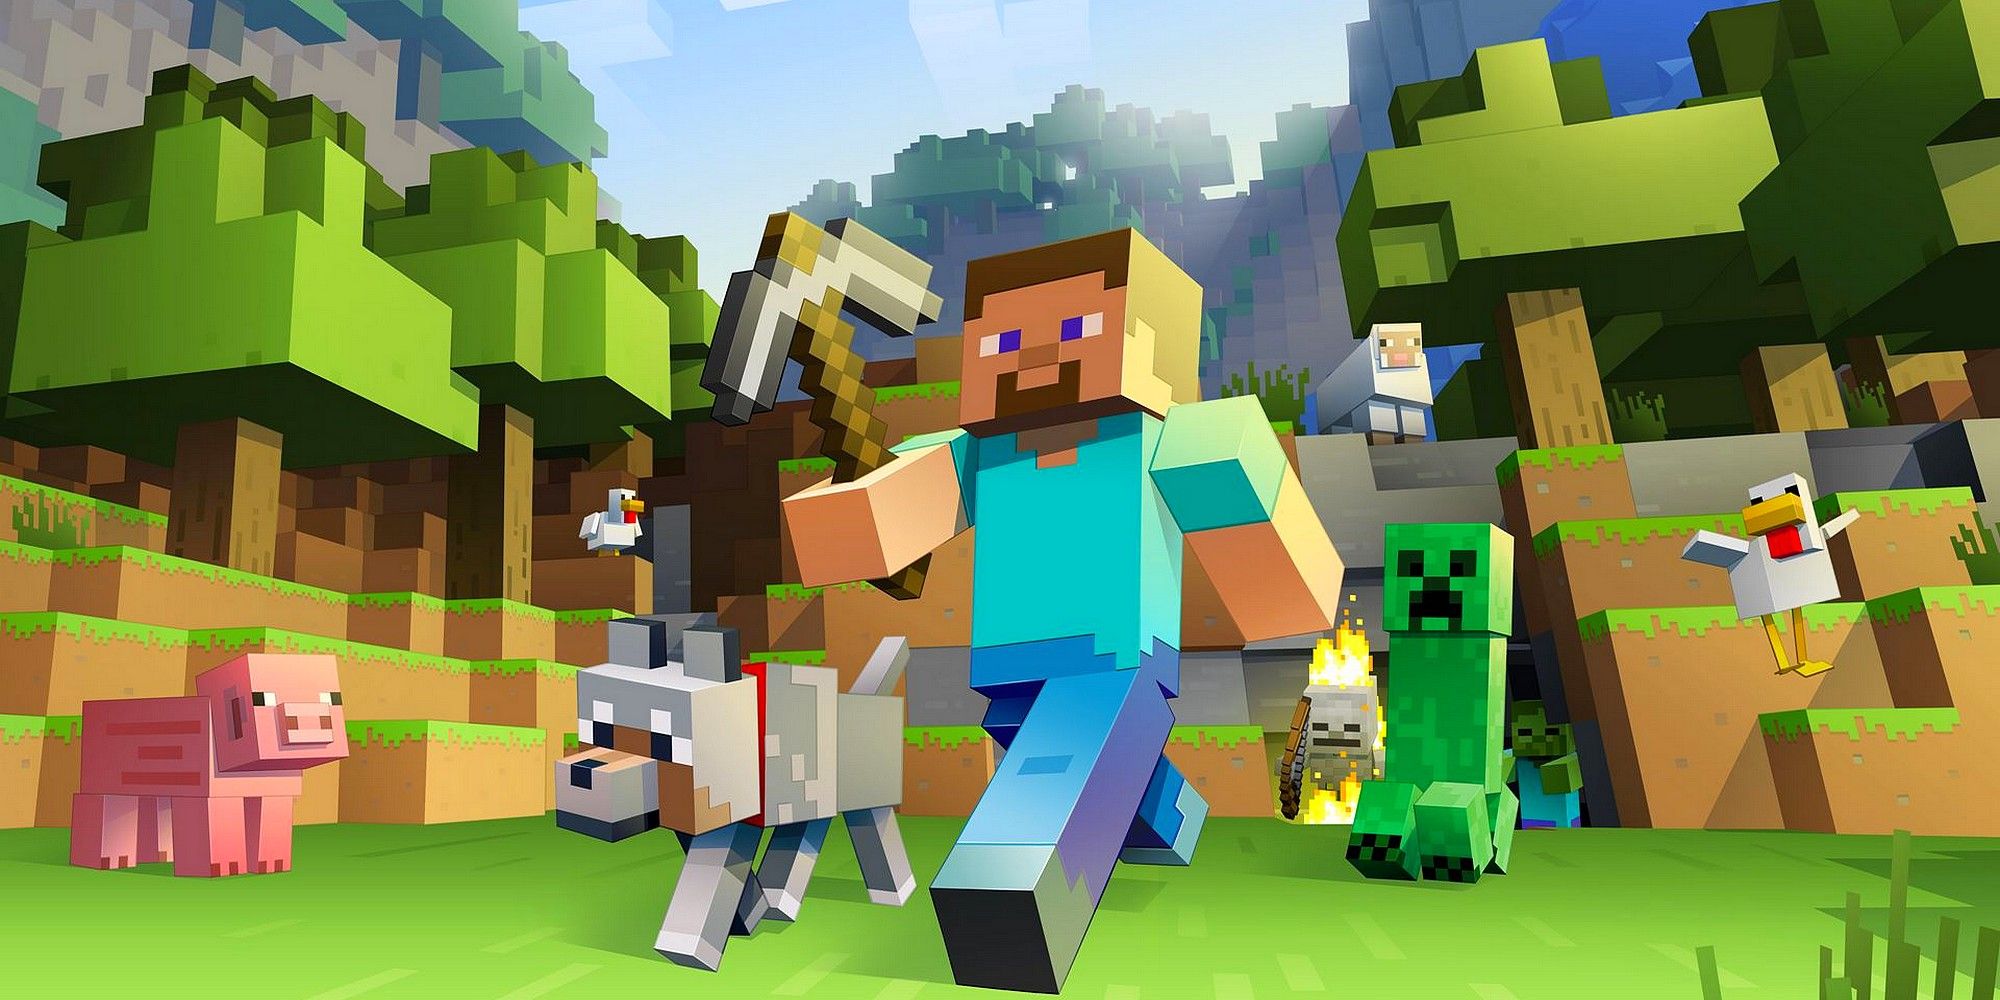 Minecraft composite image with Steve, creeper, wolf, pig, chicken, trees